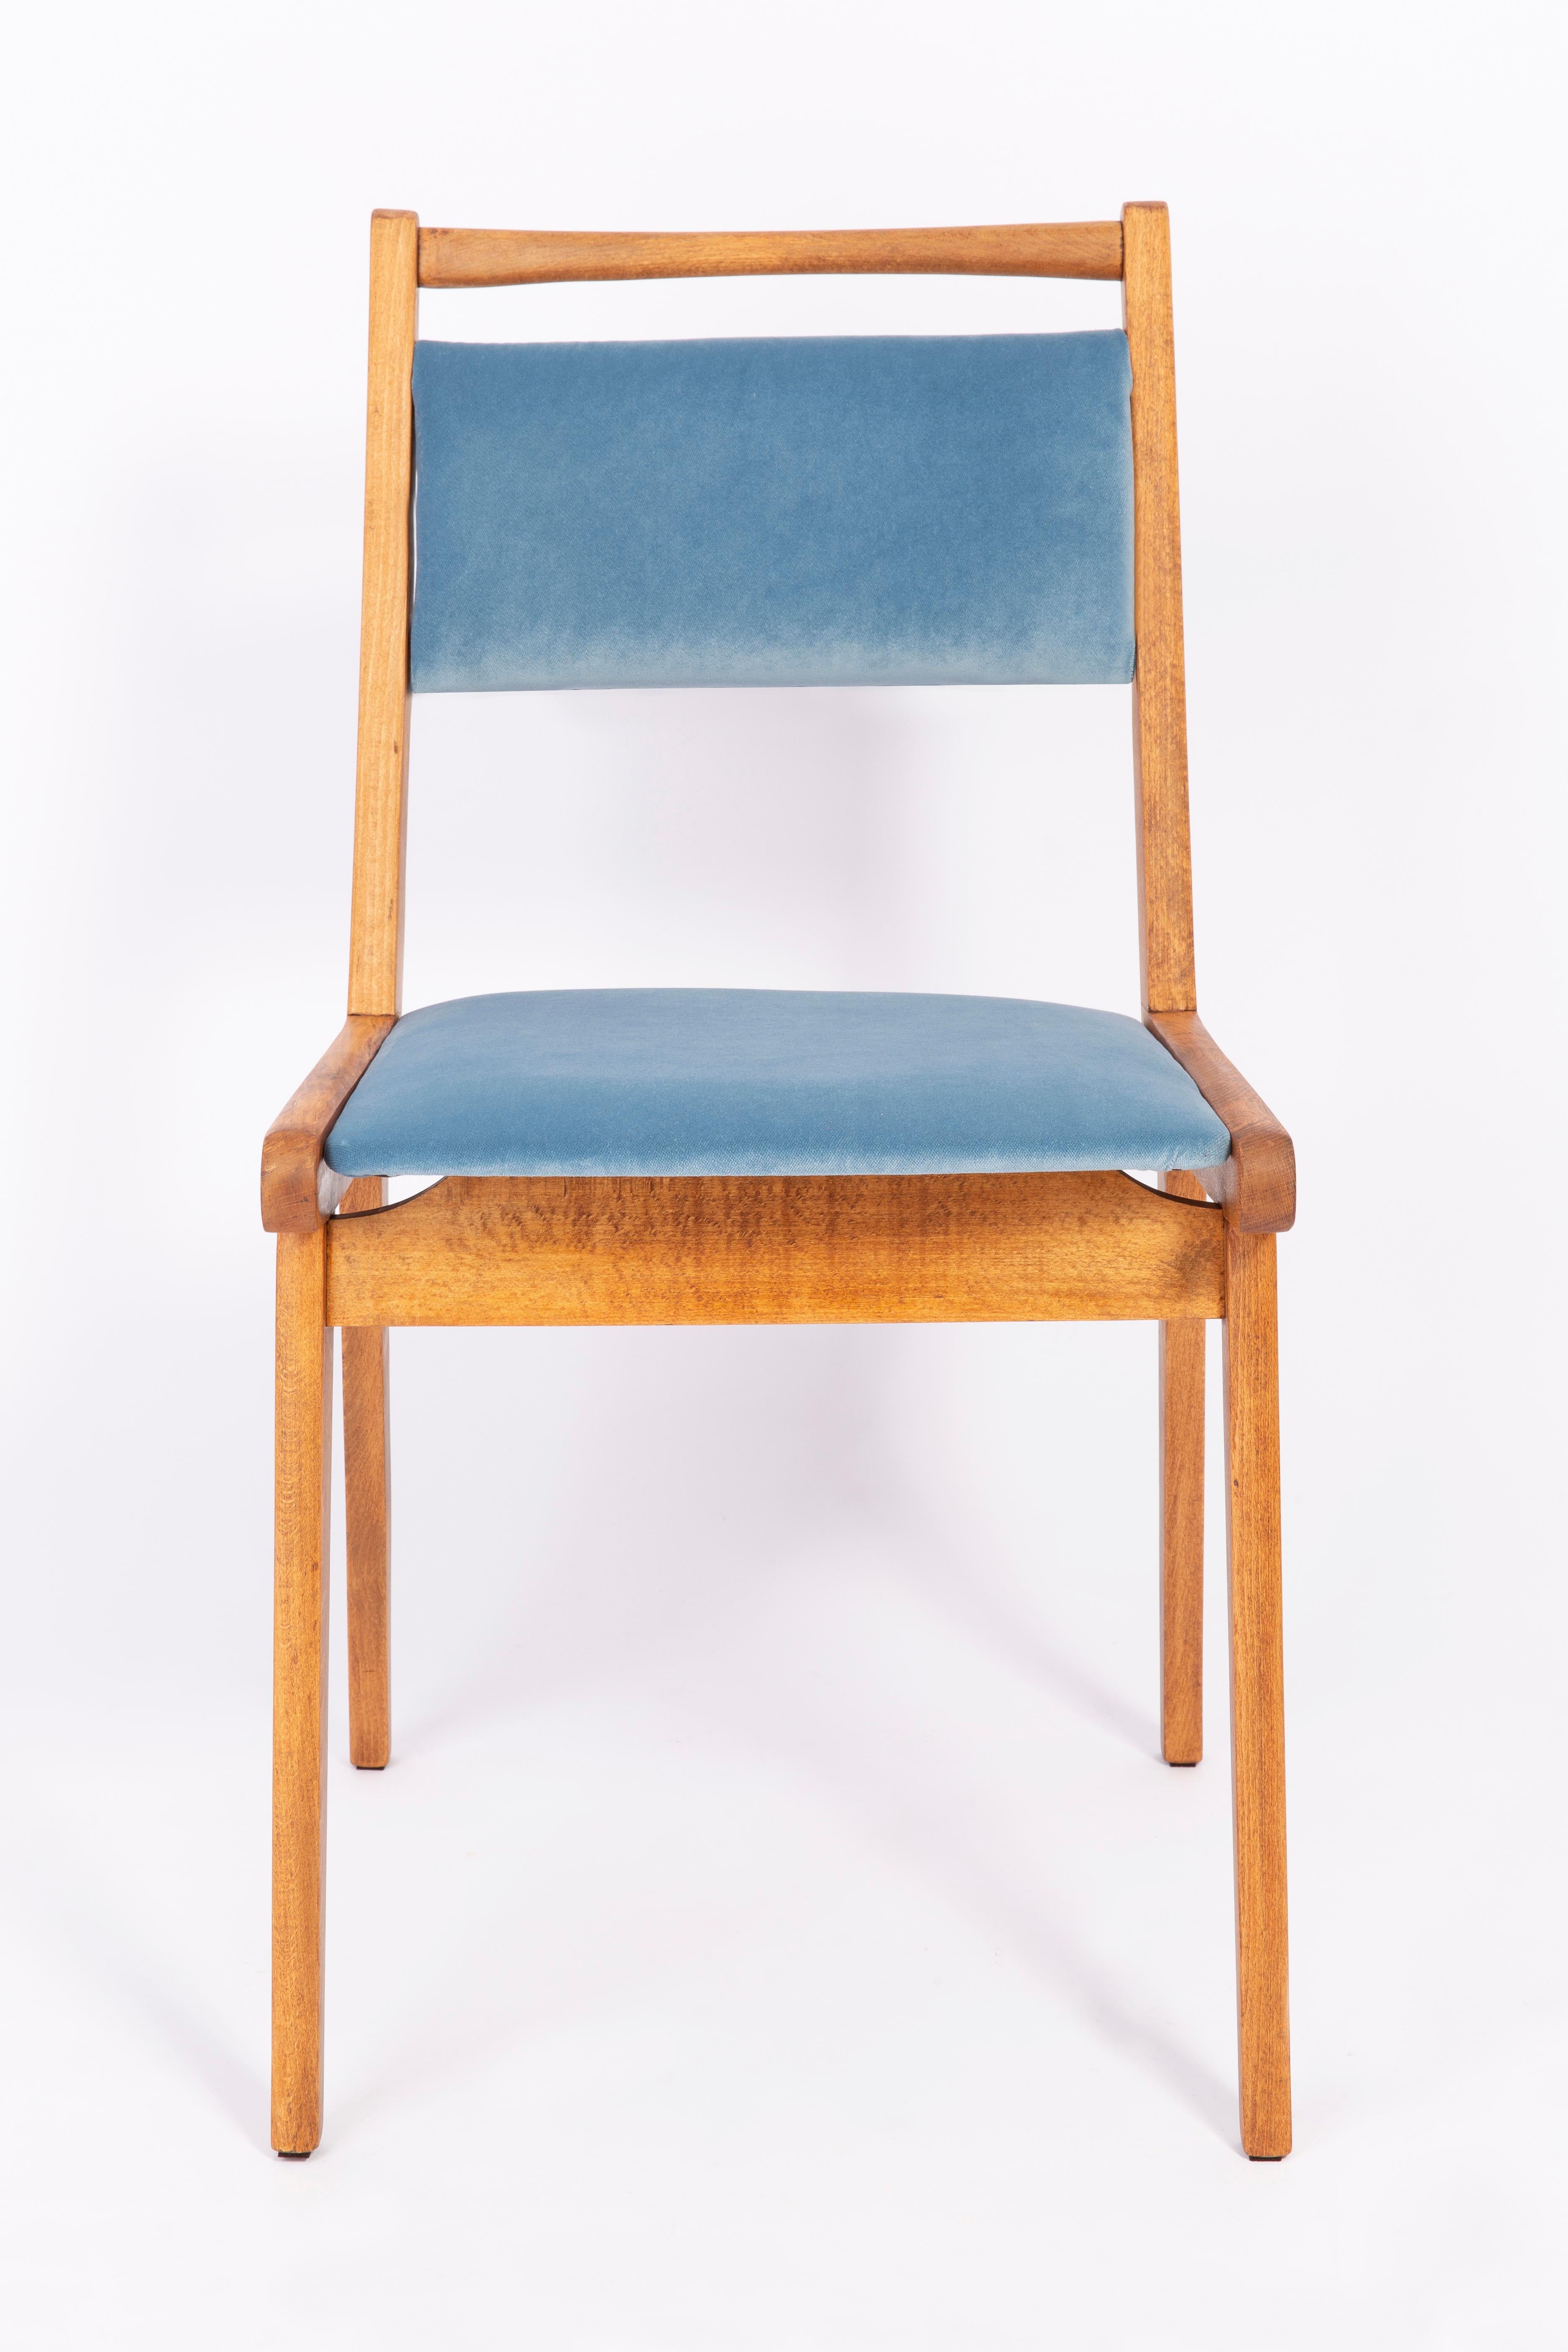 Set of Two 20th Century Blue and White Velvet Chairs, Poland, 1960s For Sale 9